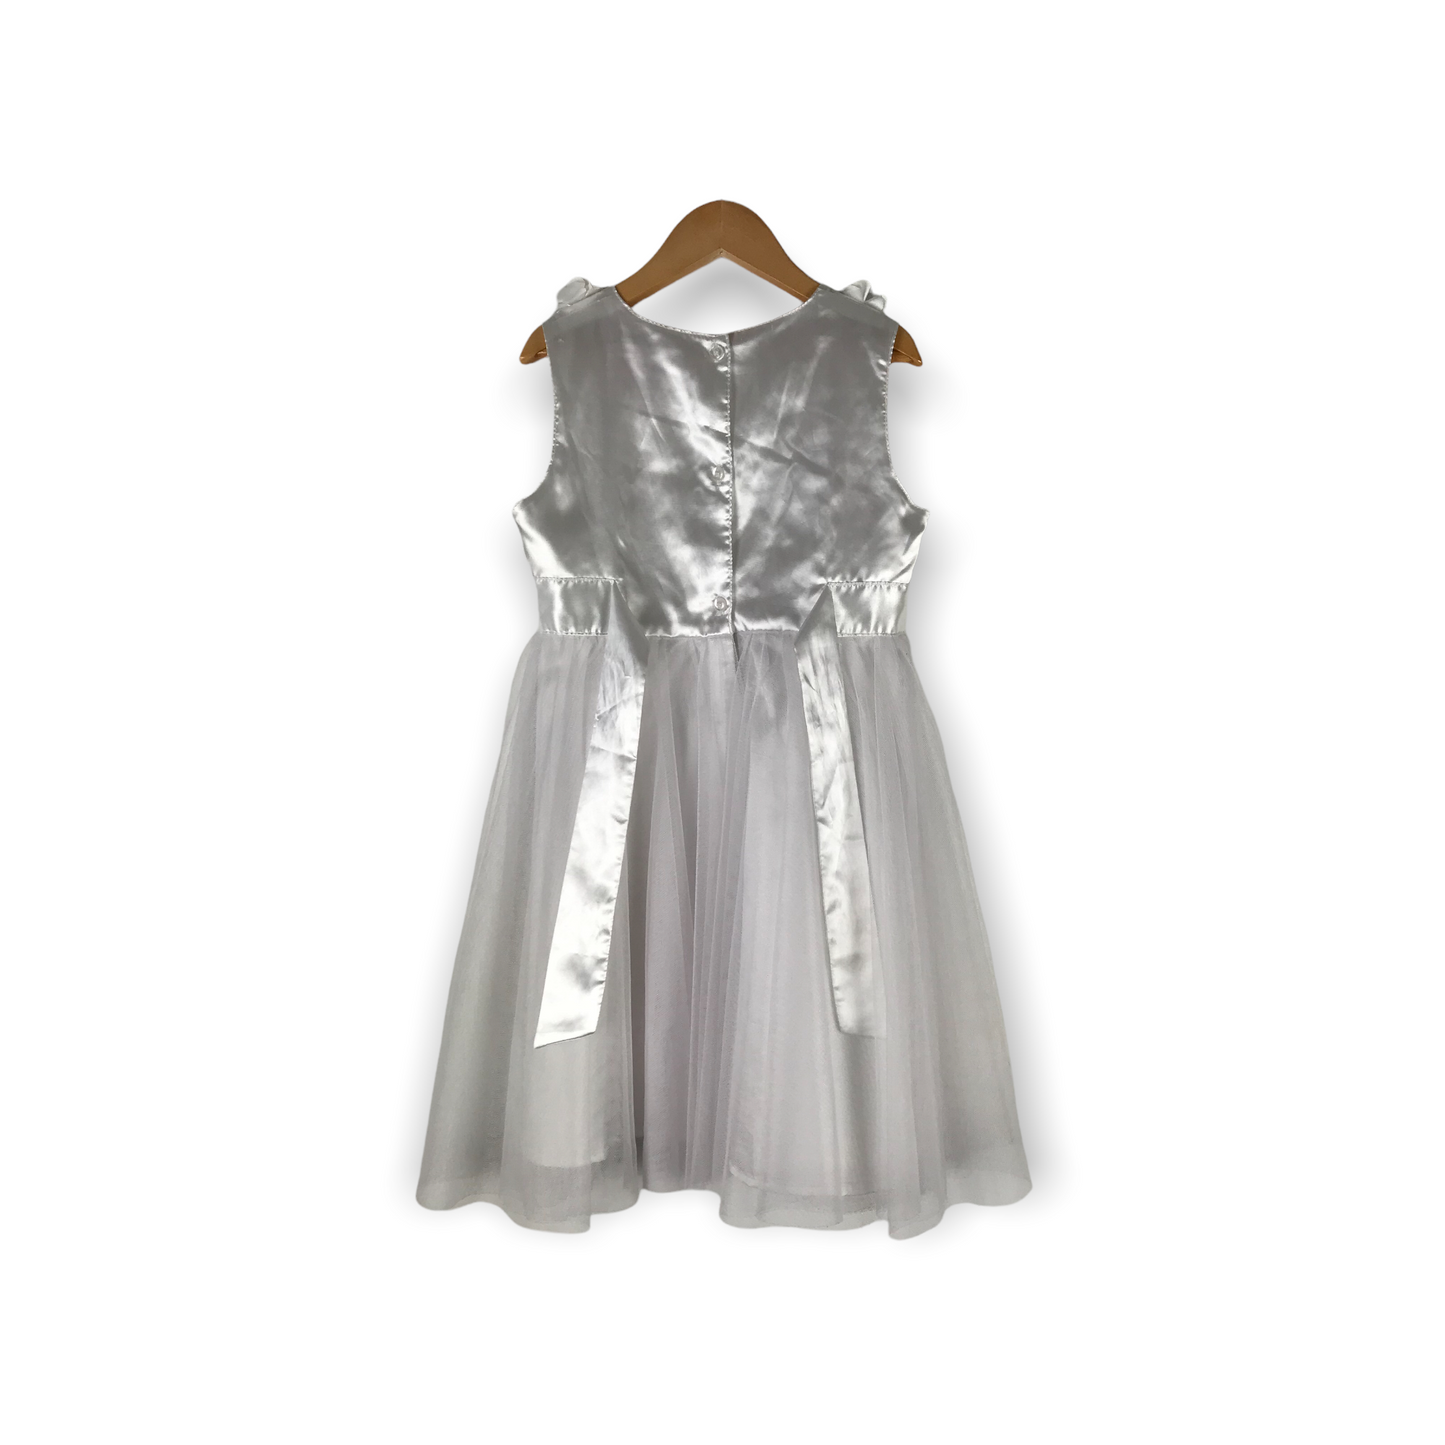 Young Dimension White Floral Formal Dress Age 6